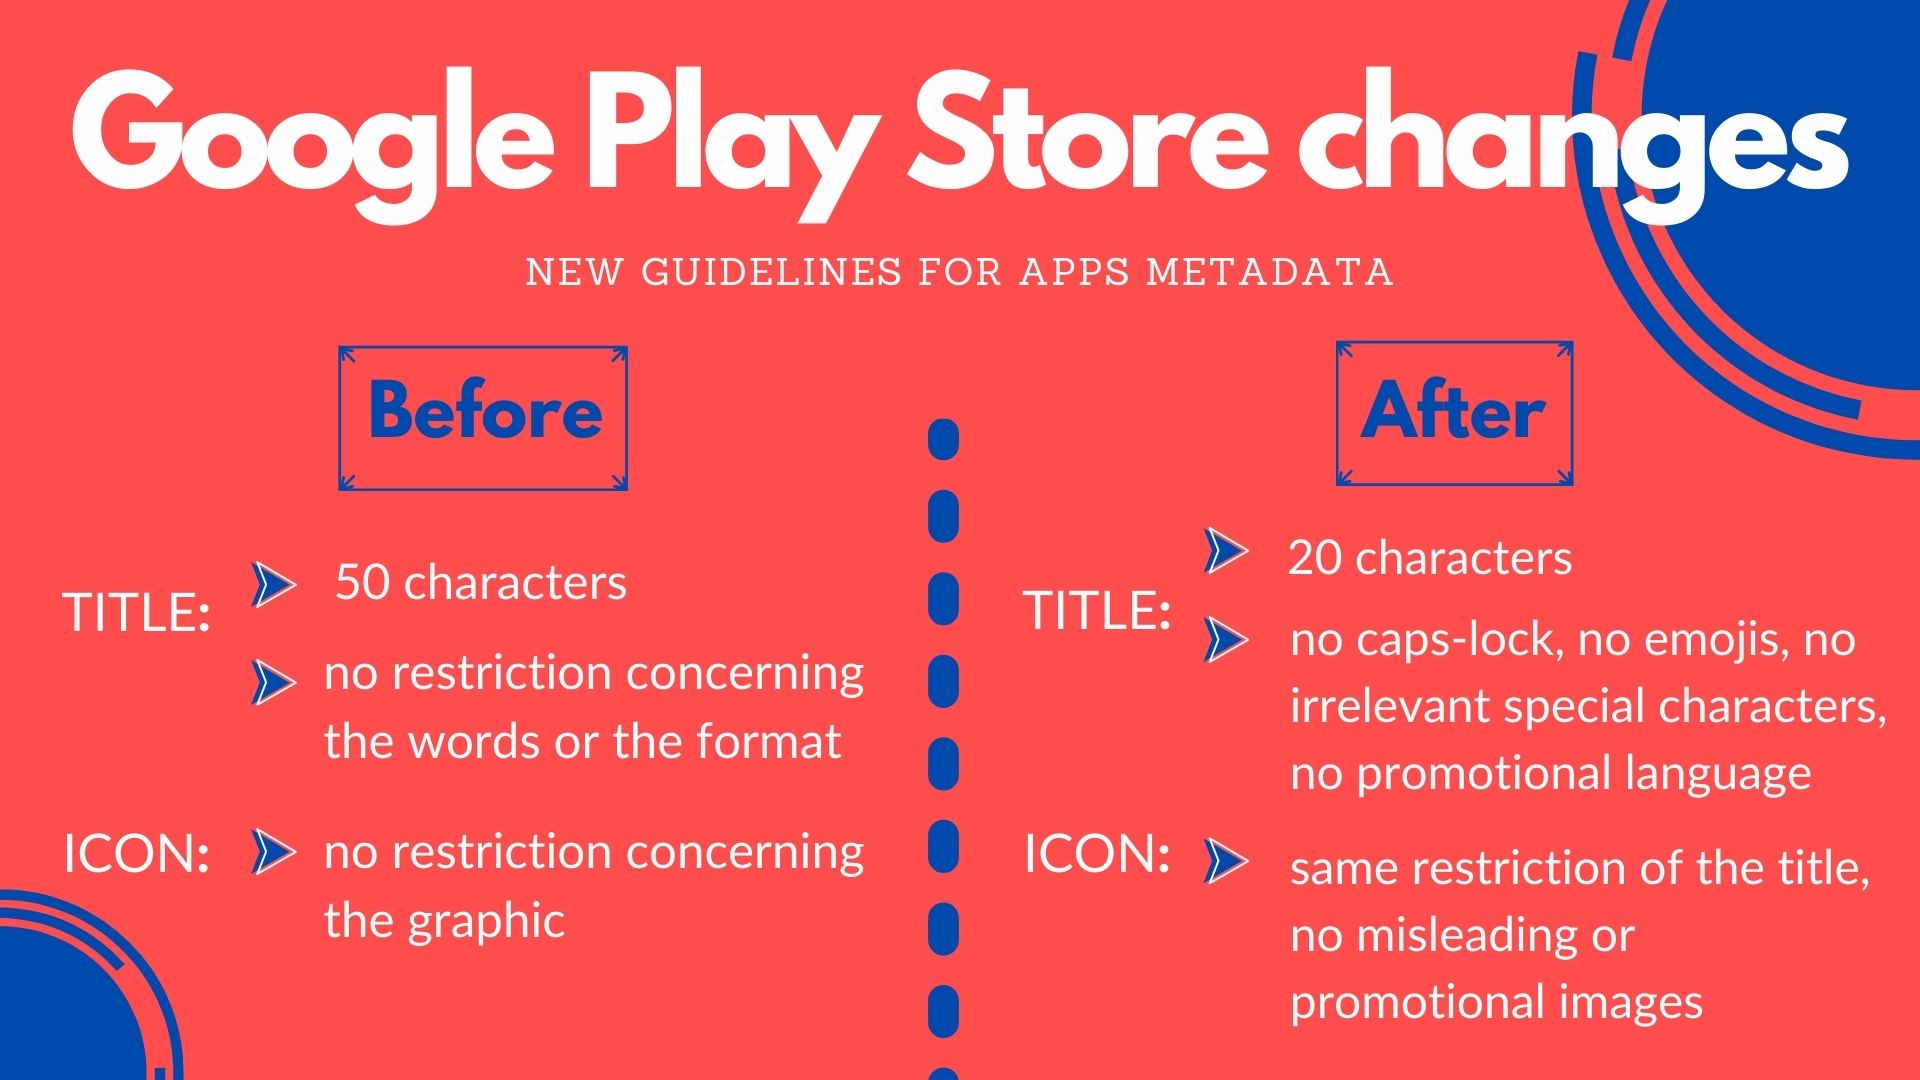 Google Play changes